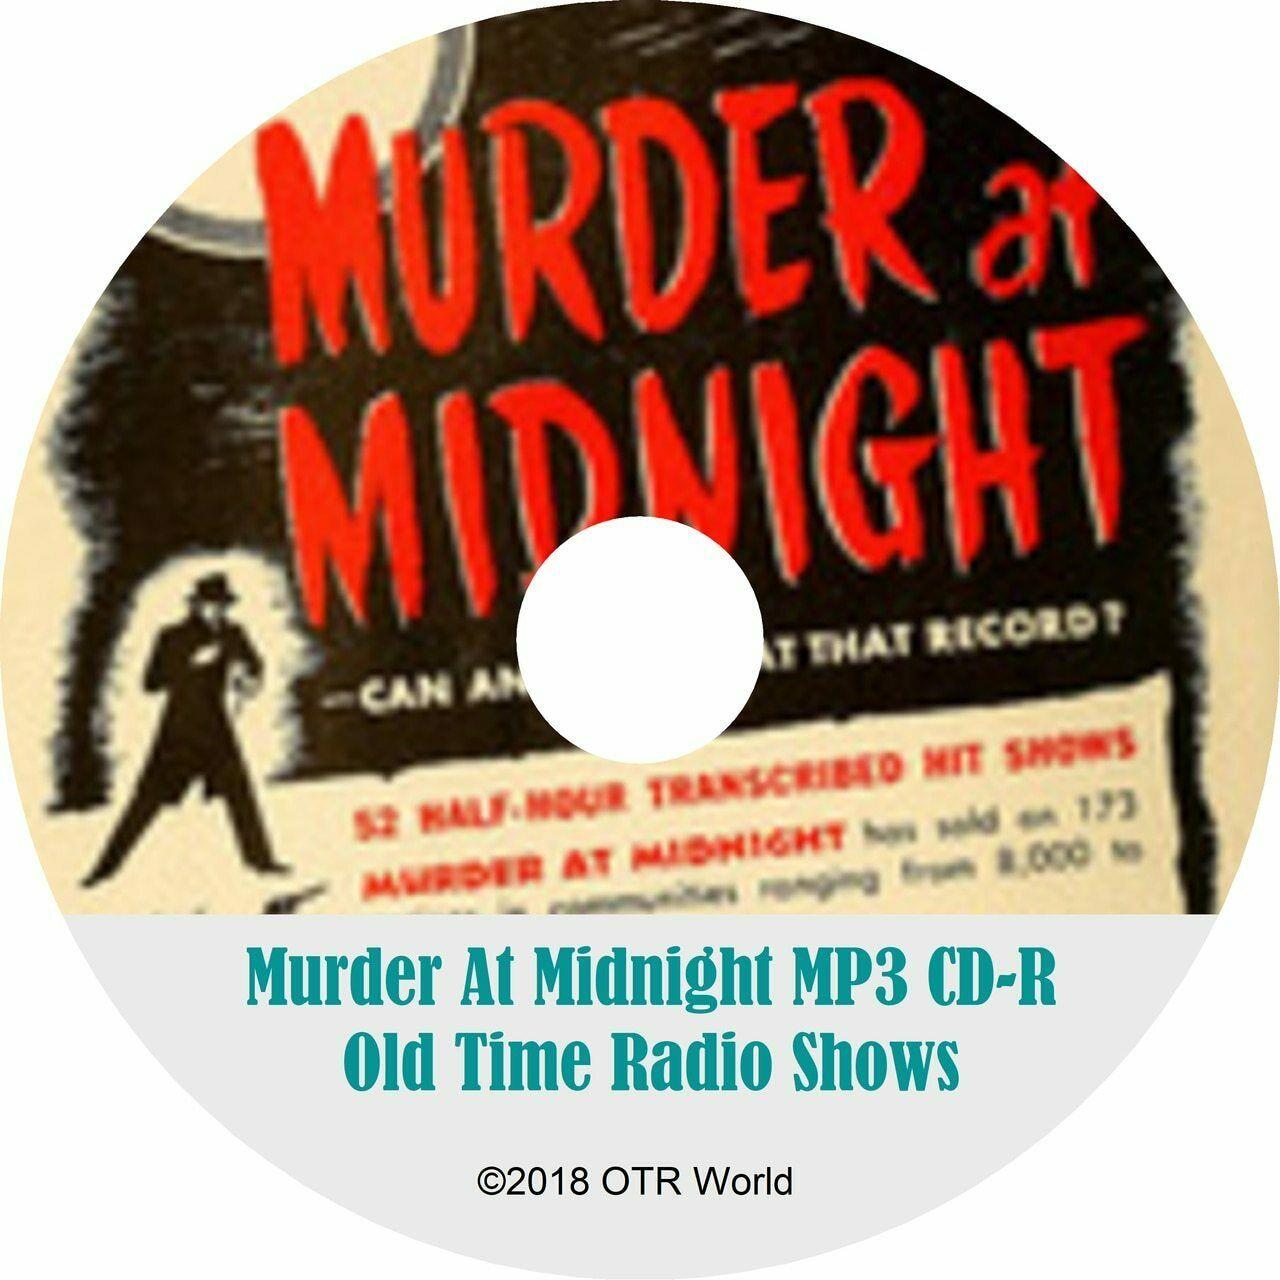 Murder At Midnight Old Time Radio OTR Shows MP3 On CD 42 Episodes